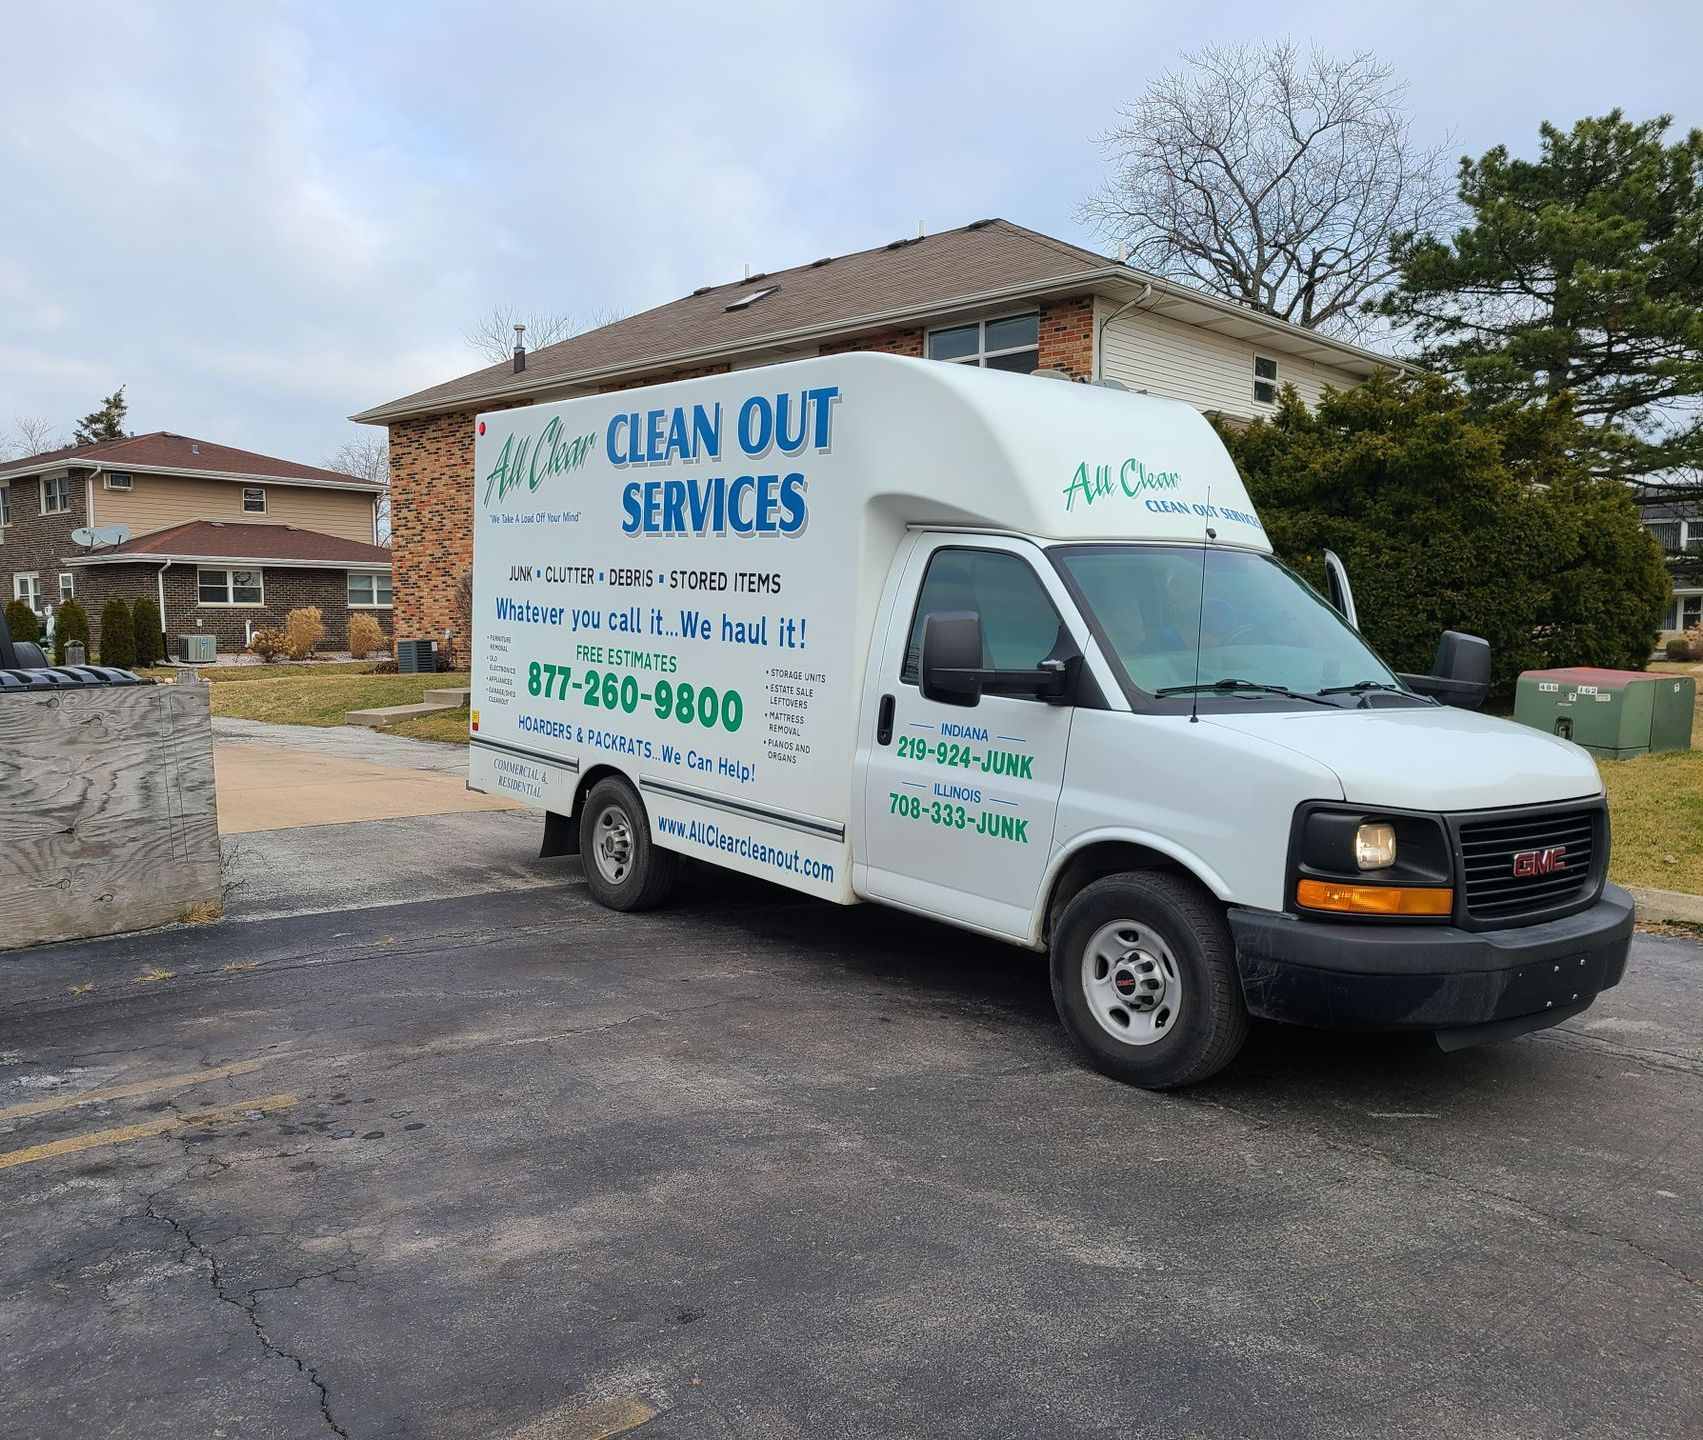 Junk clean out & hauling services in Cedar Lake, IN